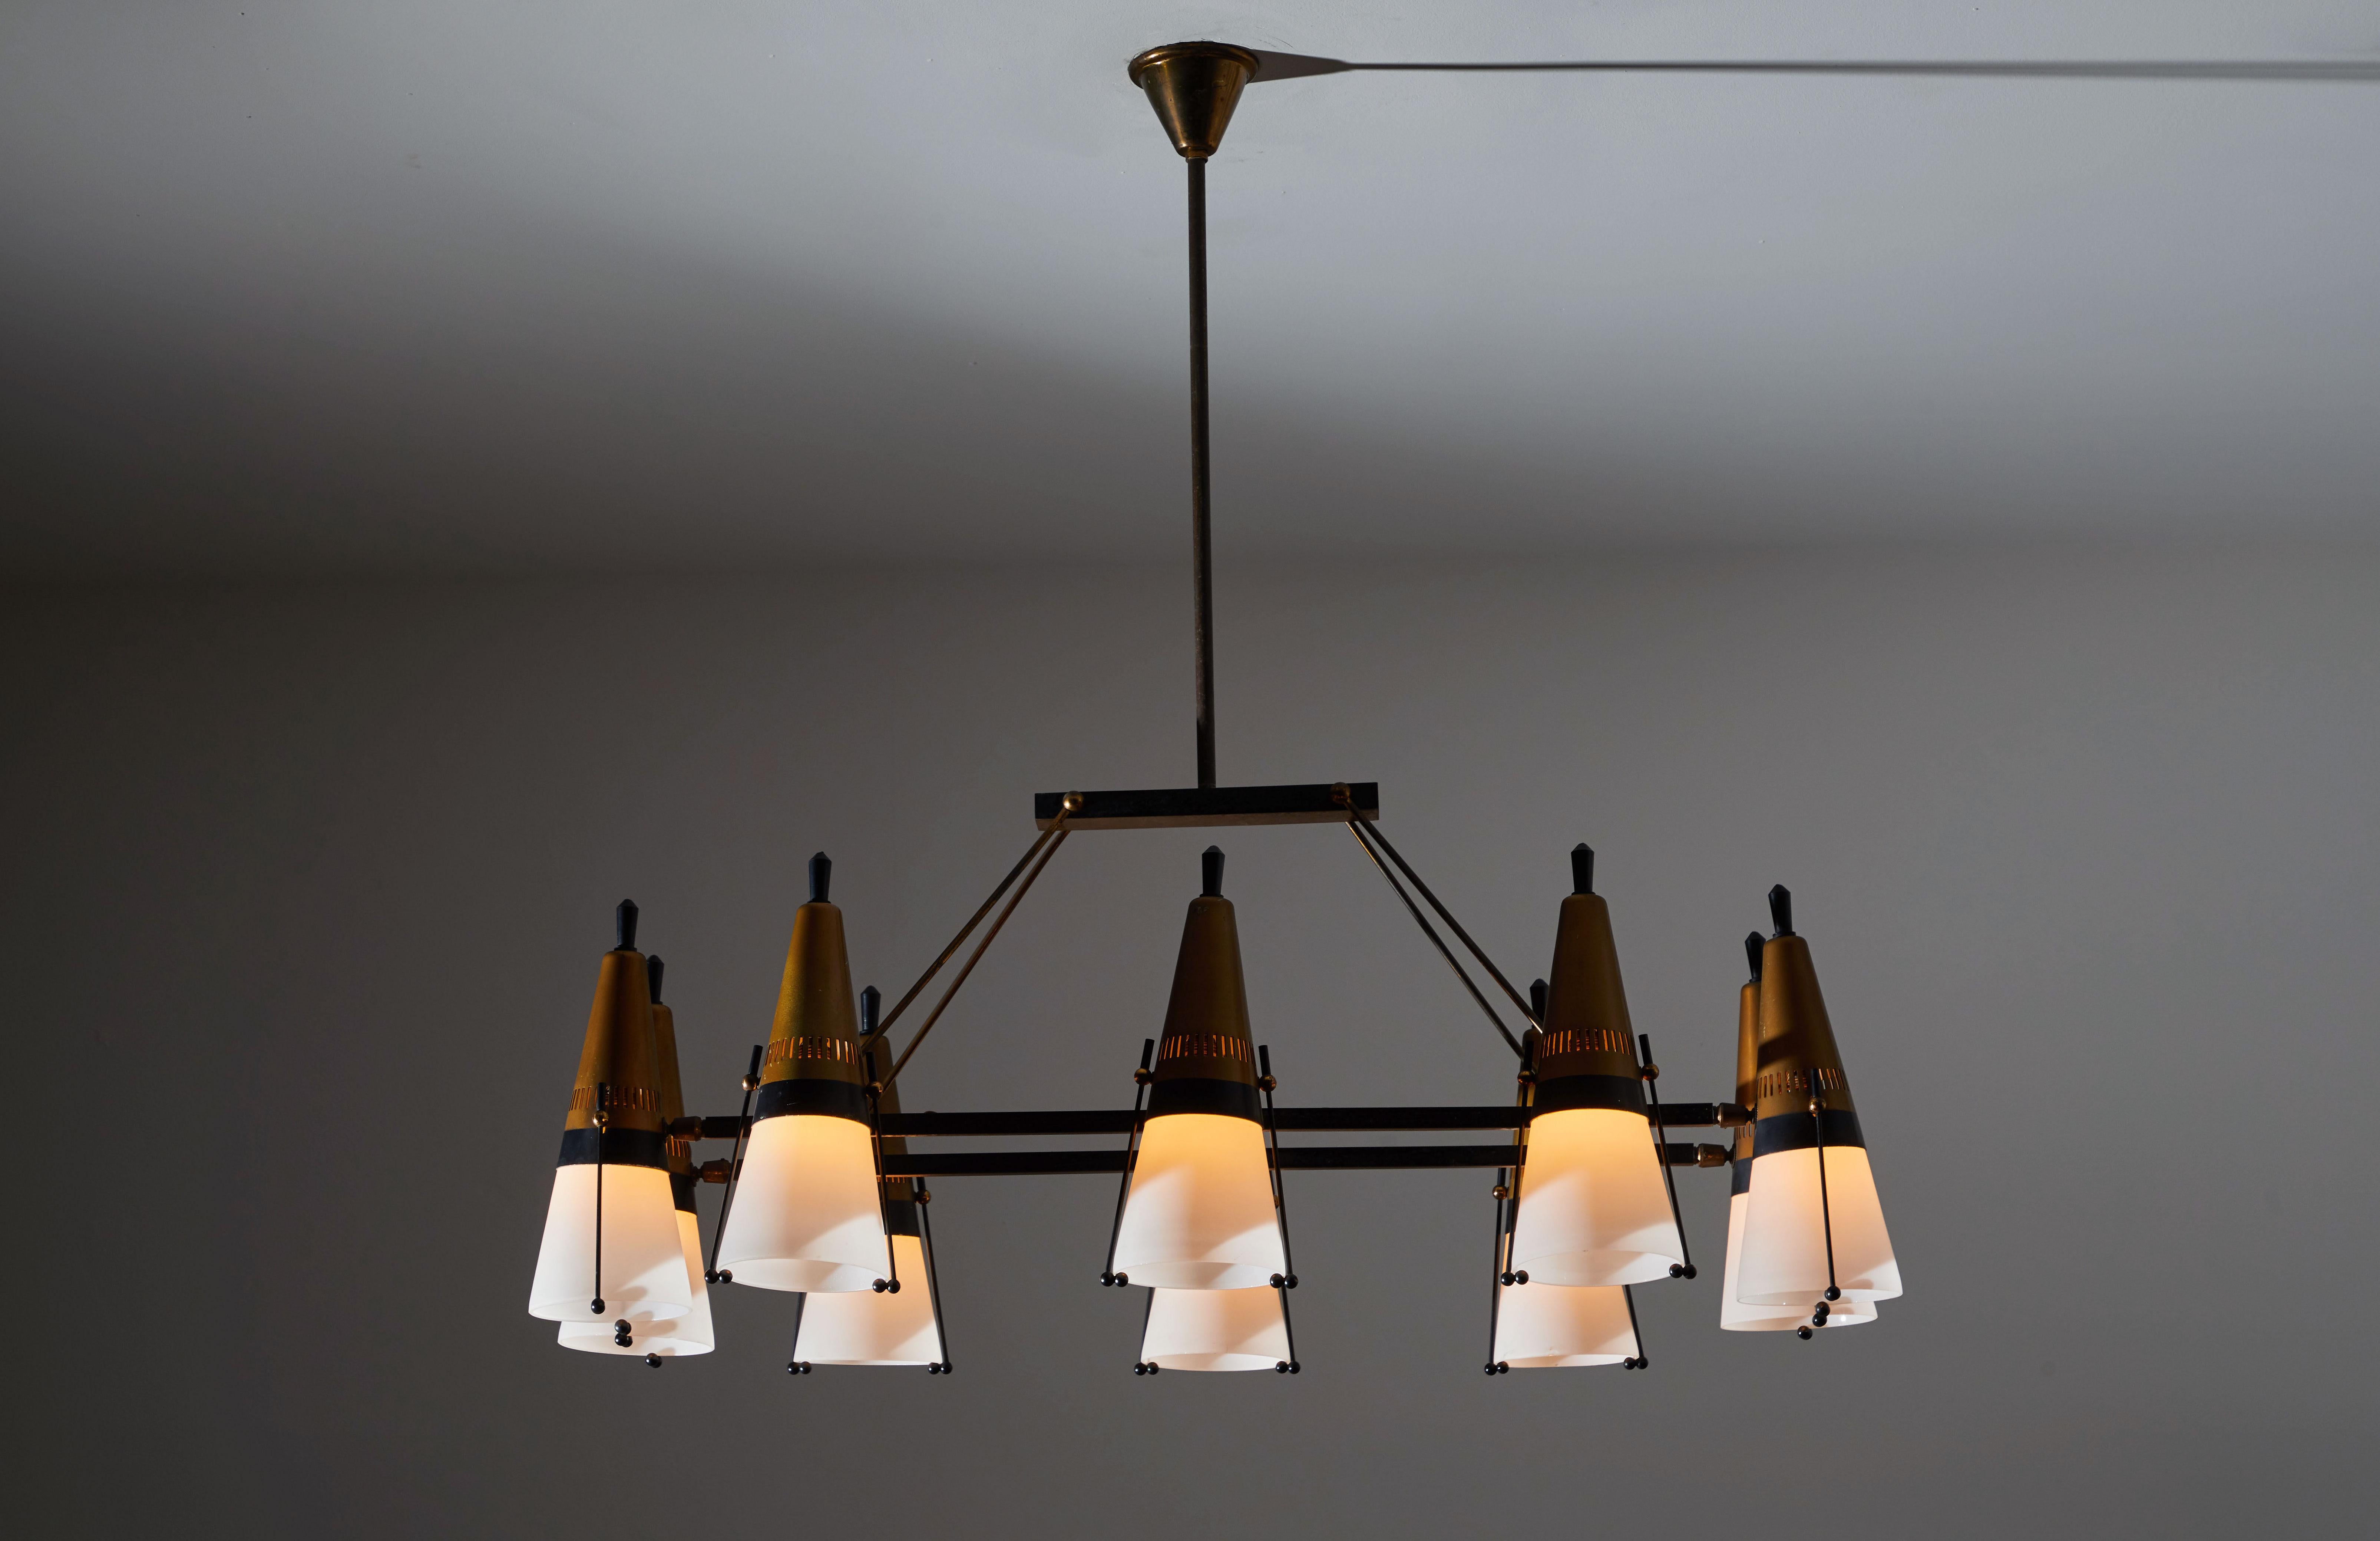 Chandelier by Lamperti. Manufactured in Italy, circa 1960s. Brass, enameled metal, brushed satin glass. Original canopy, custom brass ceiling plate, rewired for US junction boxes. Takes 10 E27 candelabra 25w maximum bulbs.